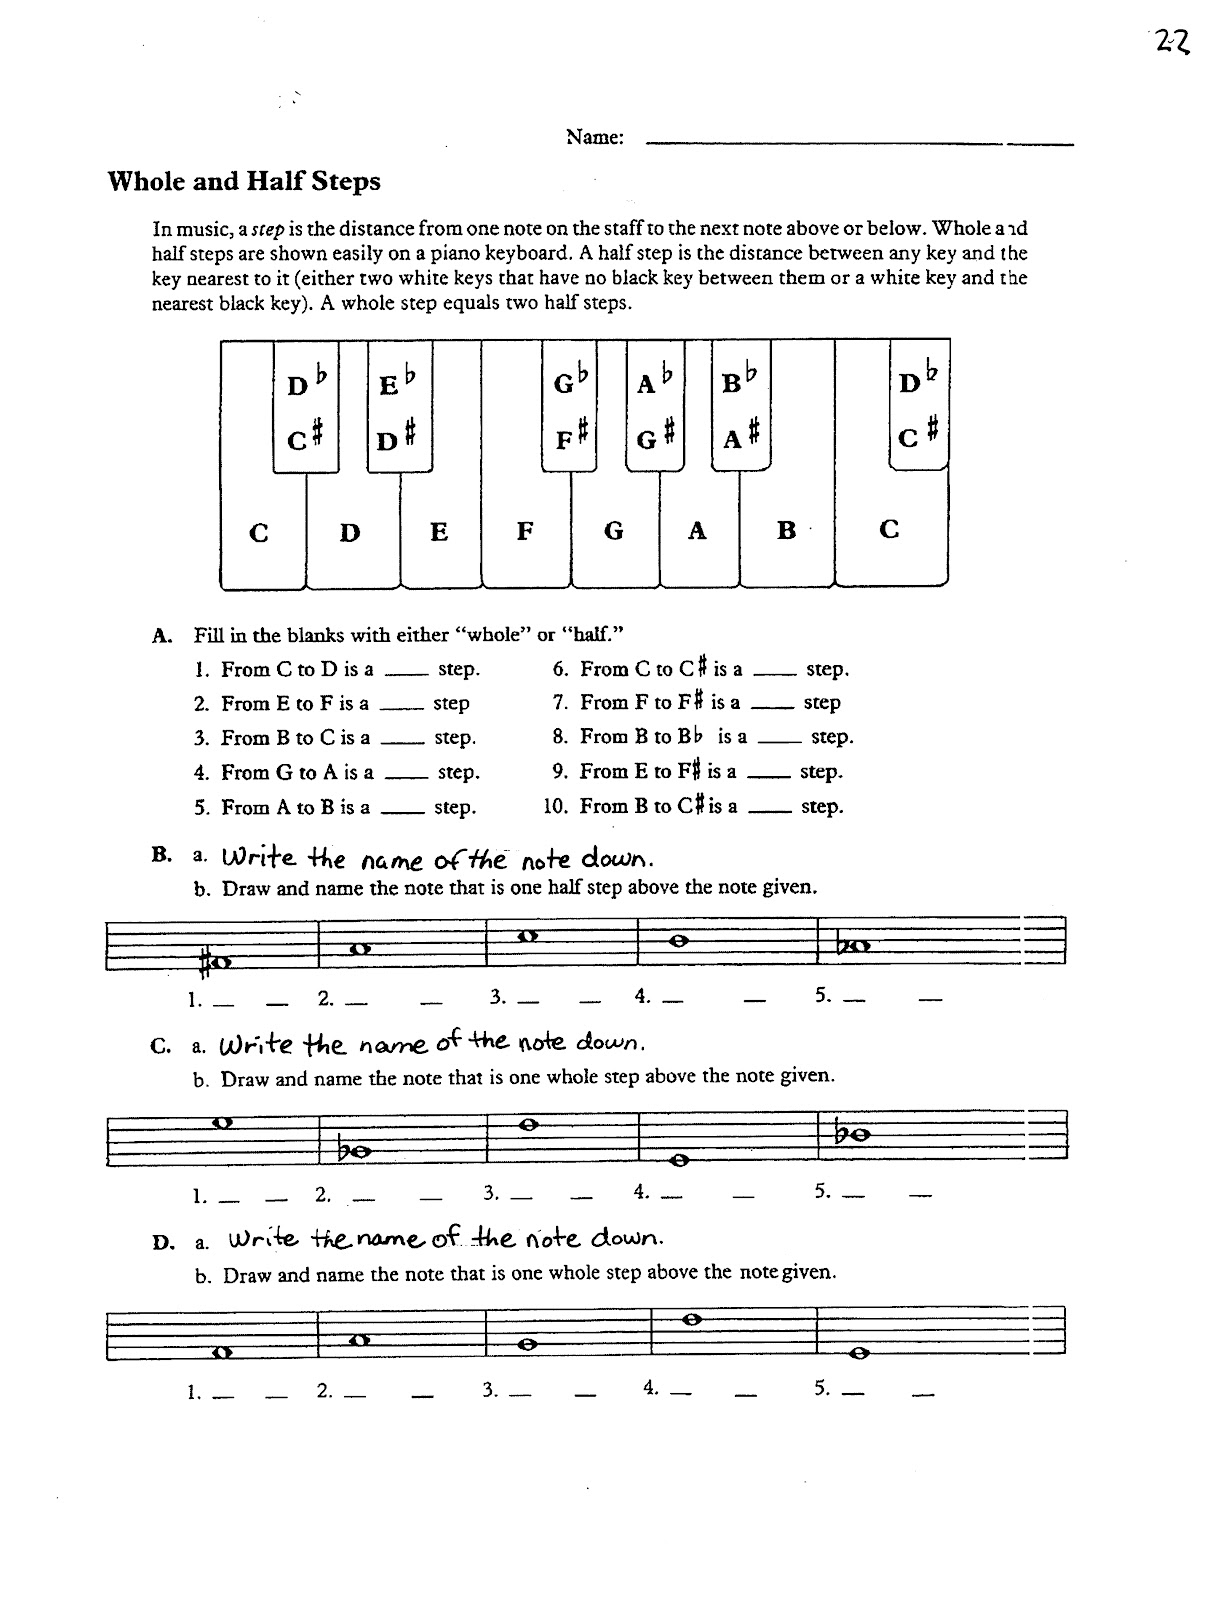 Miss Jacobson's Music: THEORY #10: HALF STEPS-WHOLE STEPS